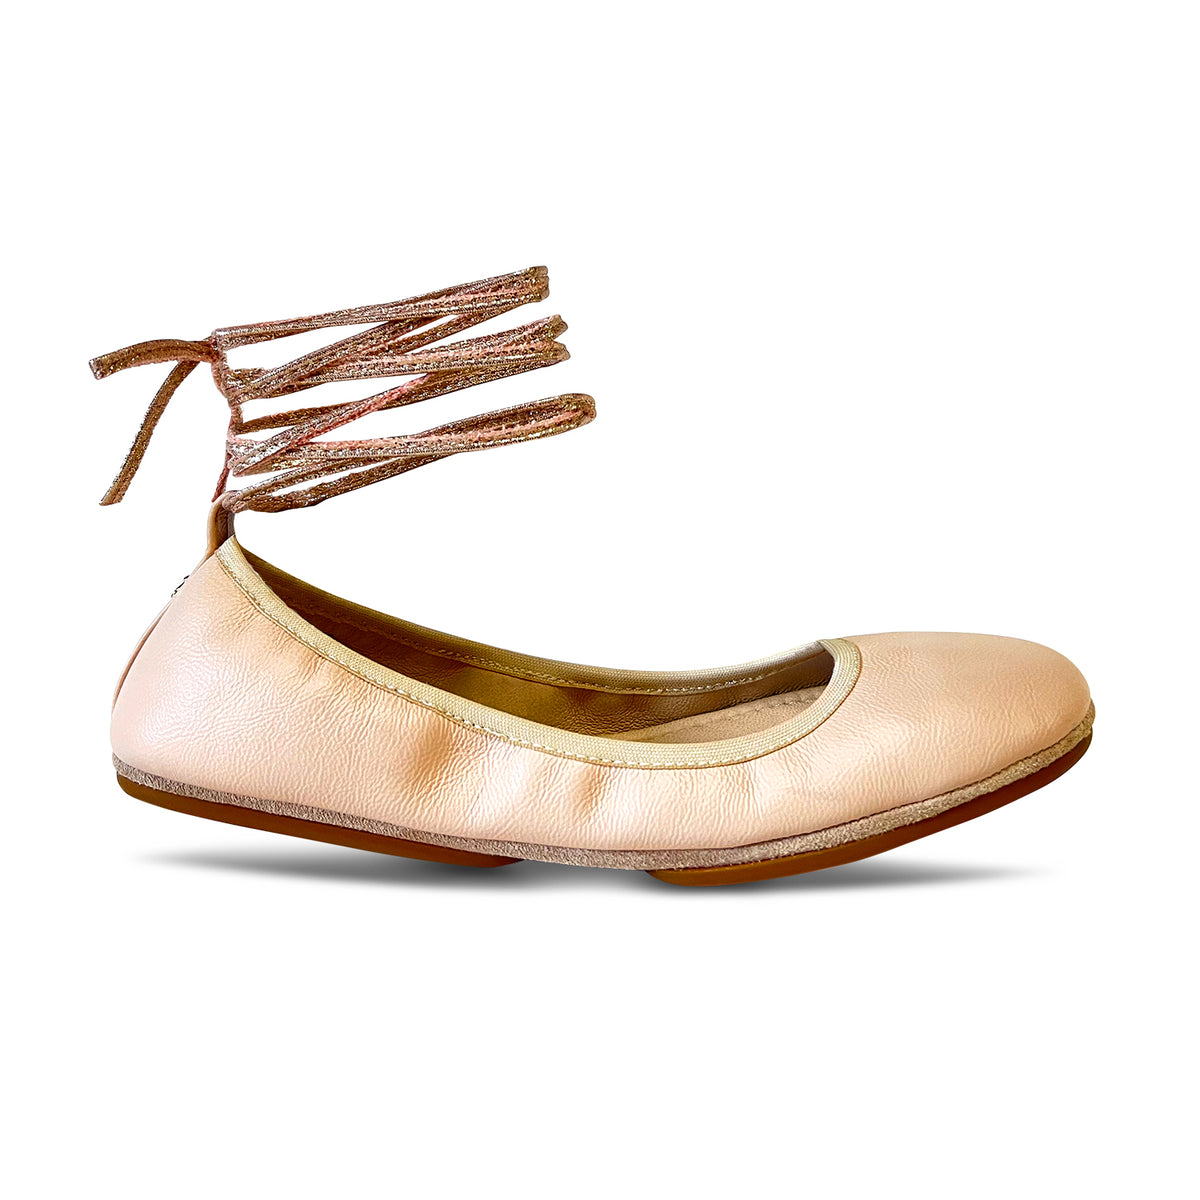 Sofia Ankle Wrap Flats in Blush Leather